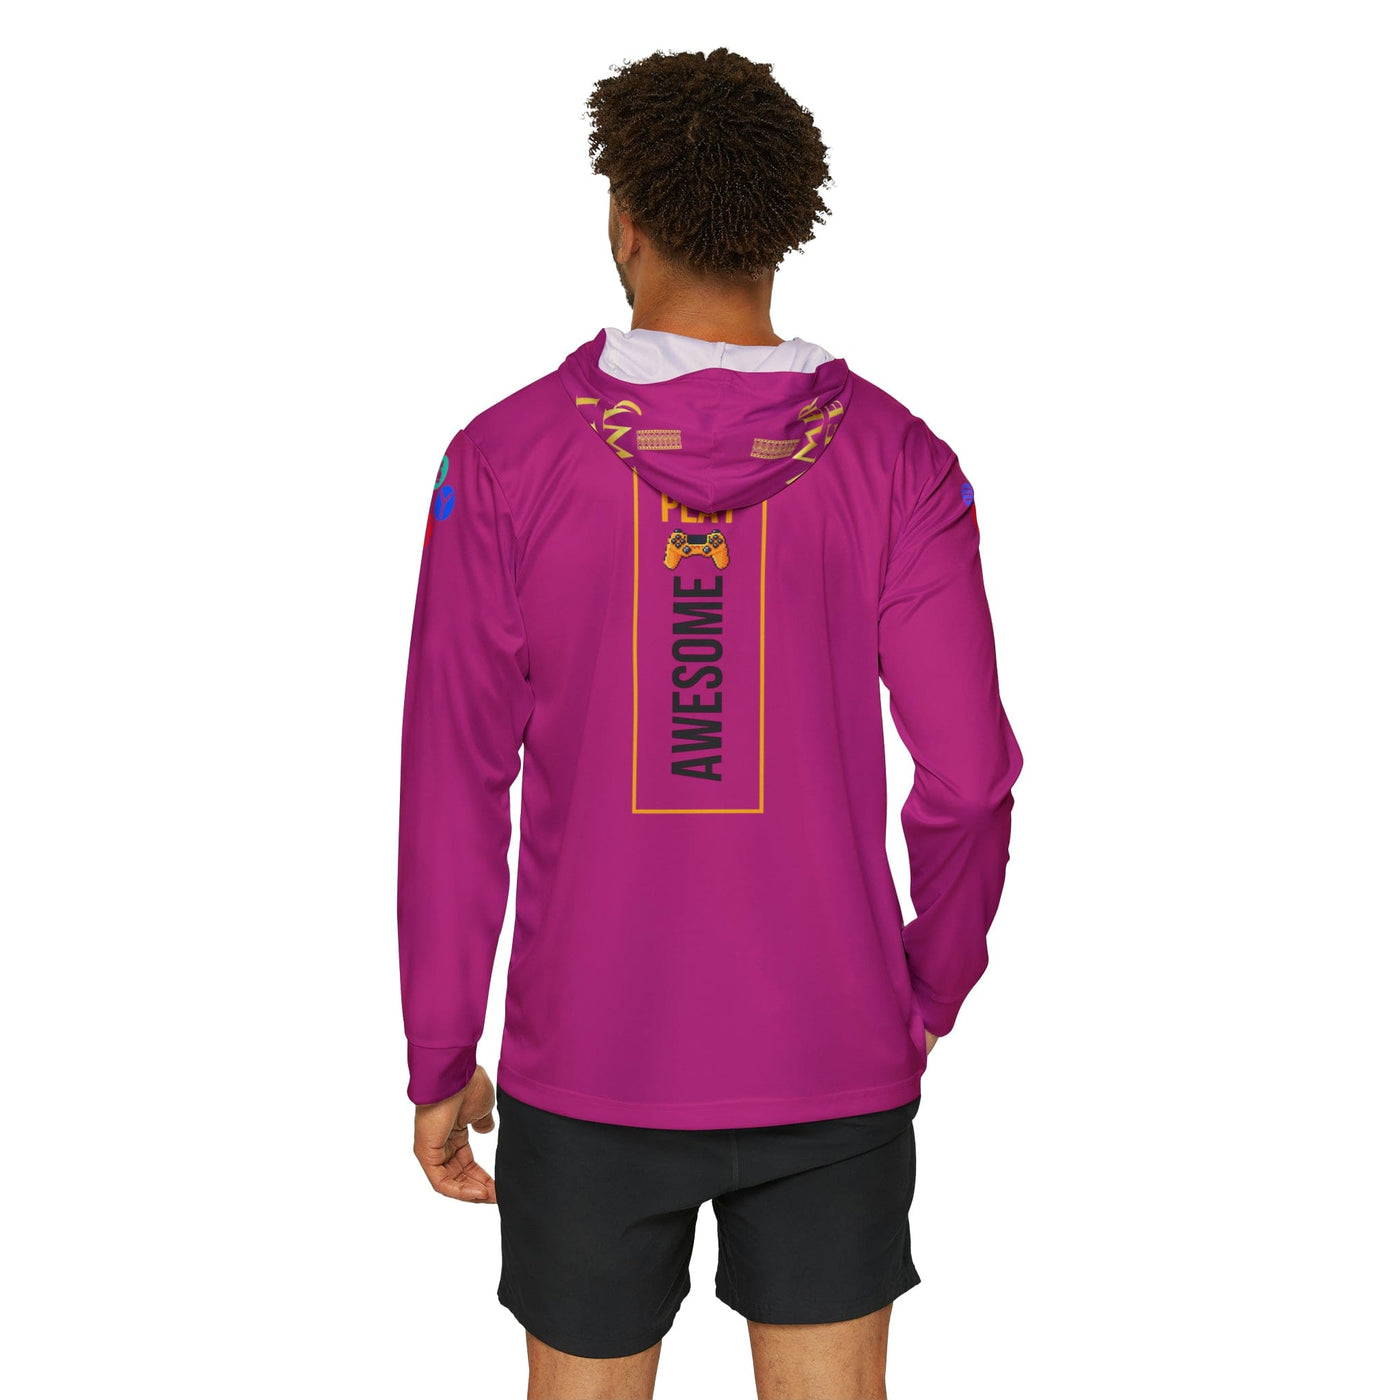 Gamer Fresh Arturo Nuro Collection | Play Awesome | Mortal Kombat 30 Year Anniversary | Candessa Limited Edition Tribute | Athletic Warmup Pink Hoodie